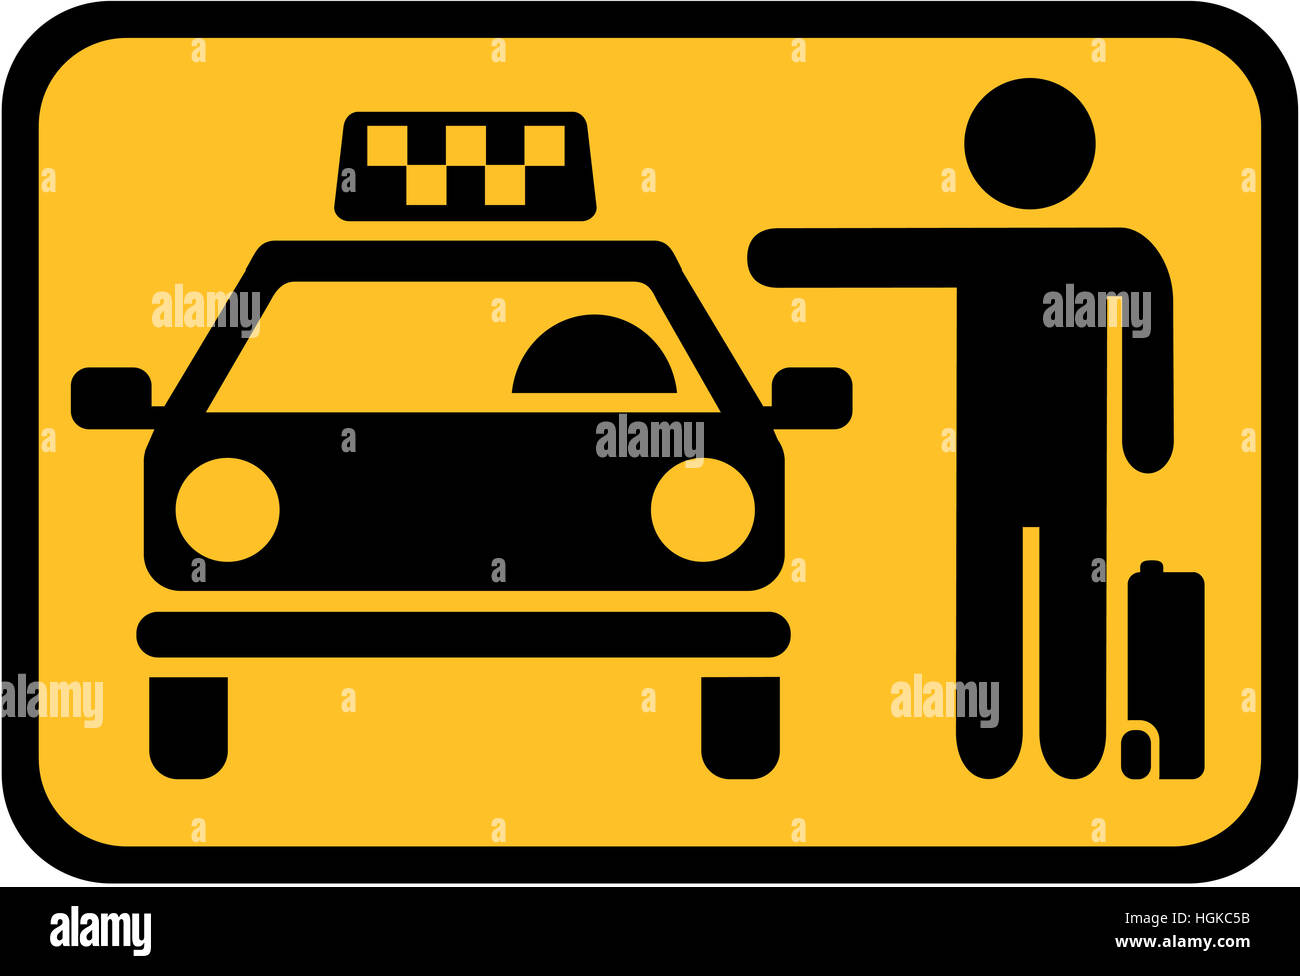 Catching a taxi - Yellow cab icon Stock Photo